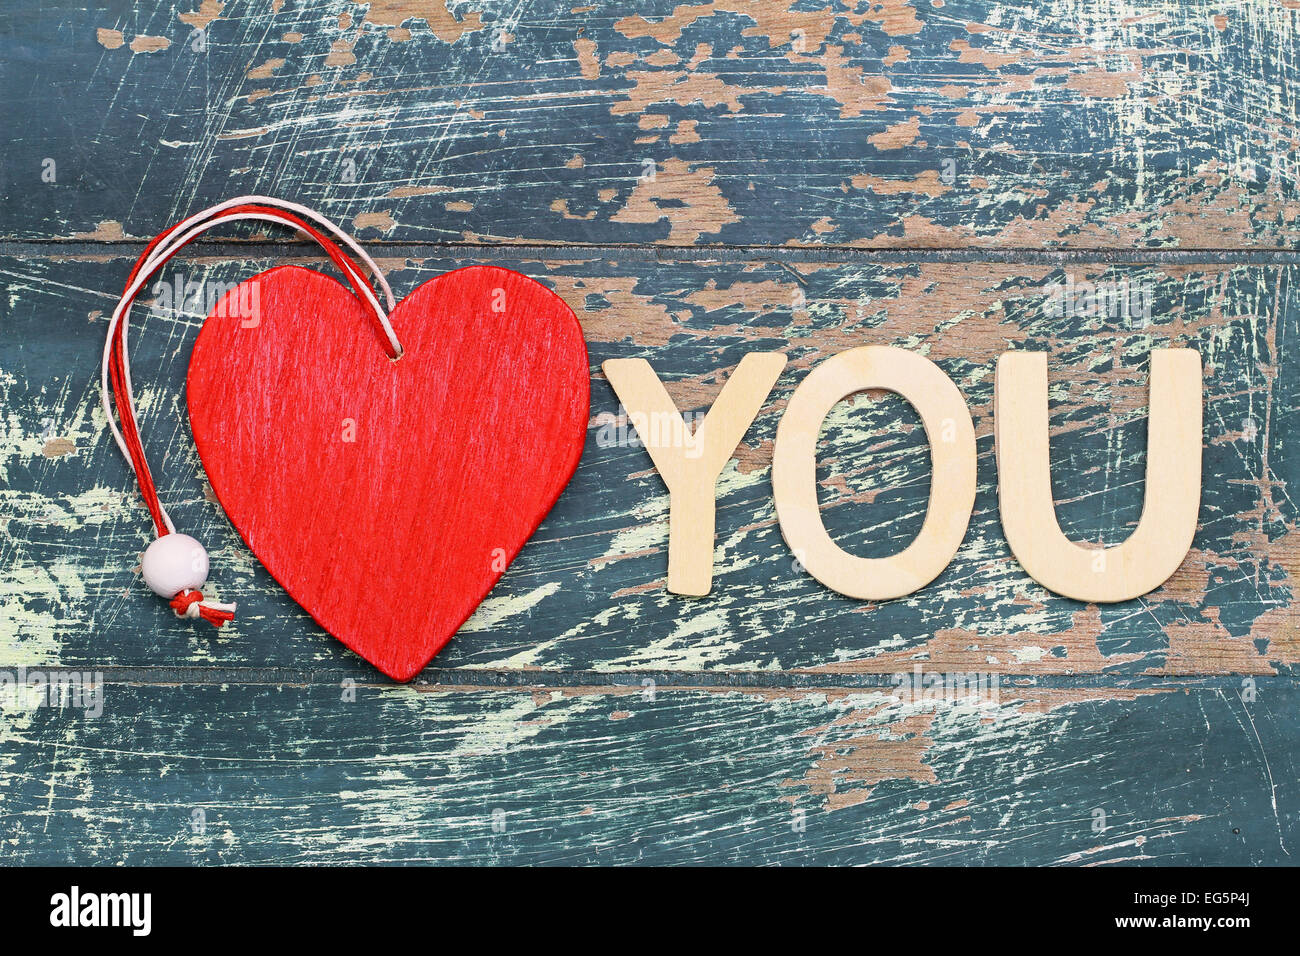 Love you sign on rustic wooden surface Stock Photo